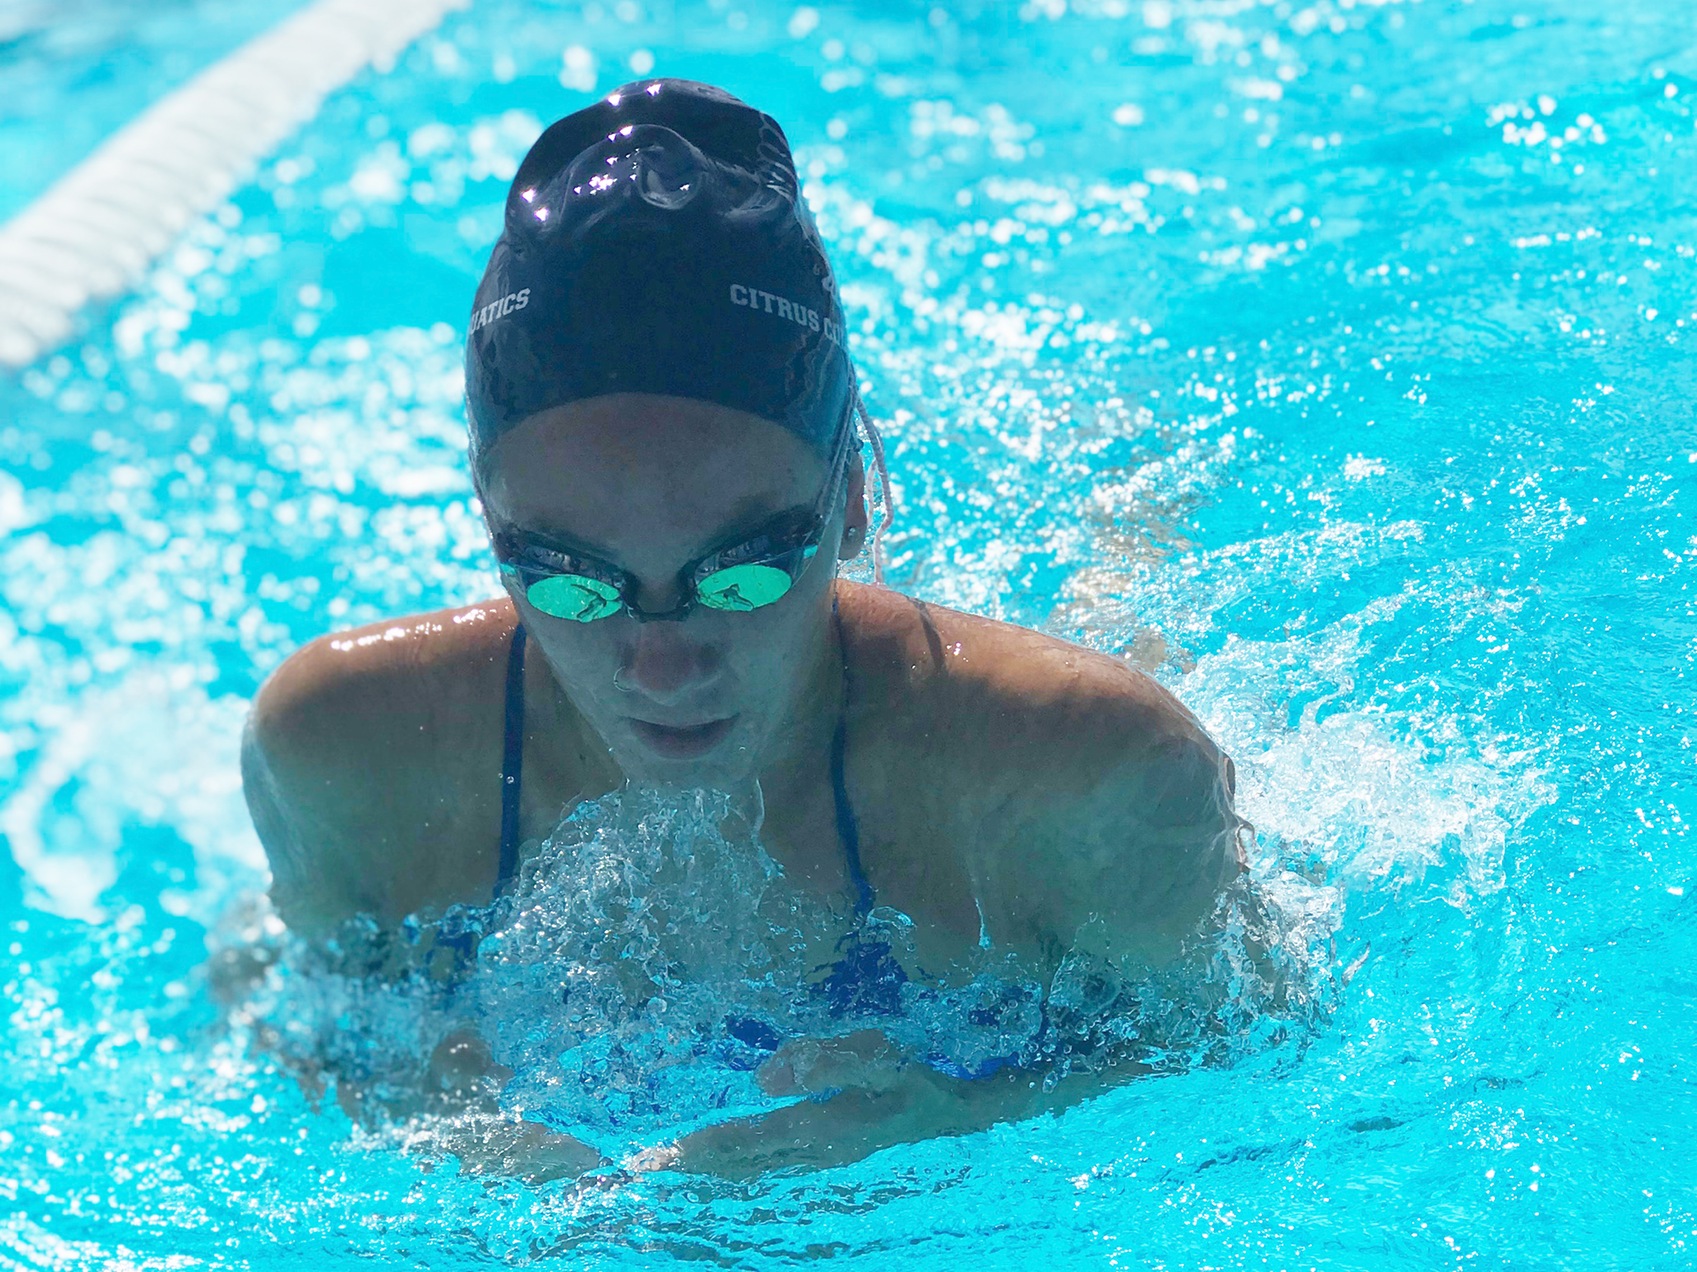 Samantha Wilson competes in the 100 Breaststroke. Photo credit: Jennifer Spalding